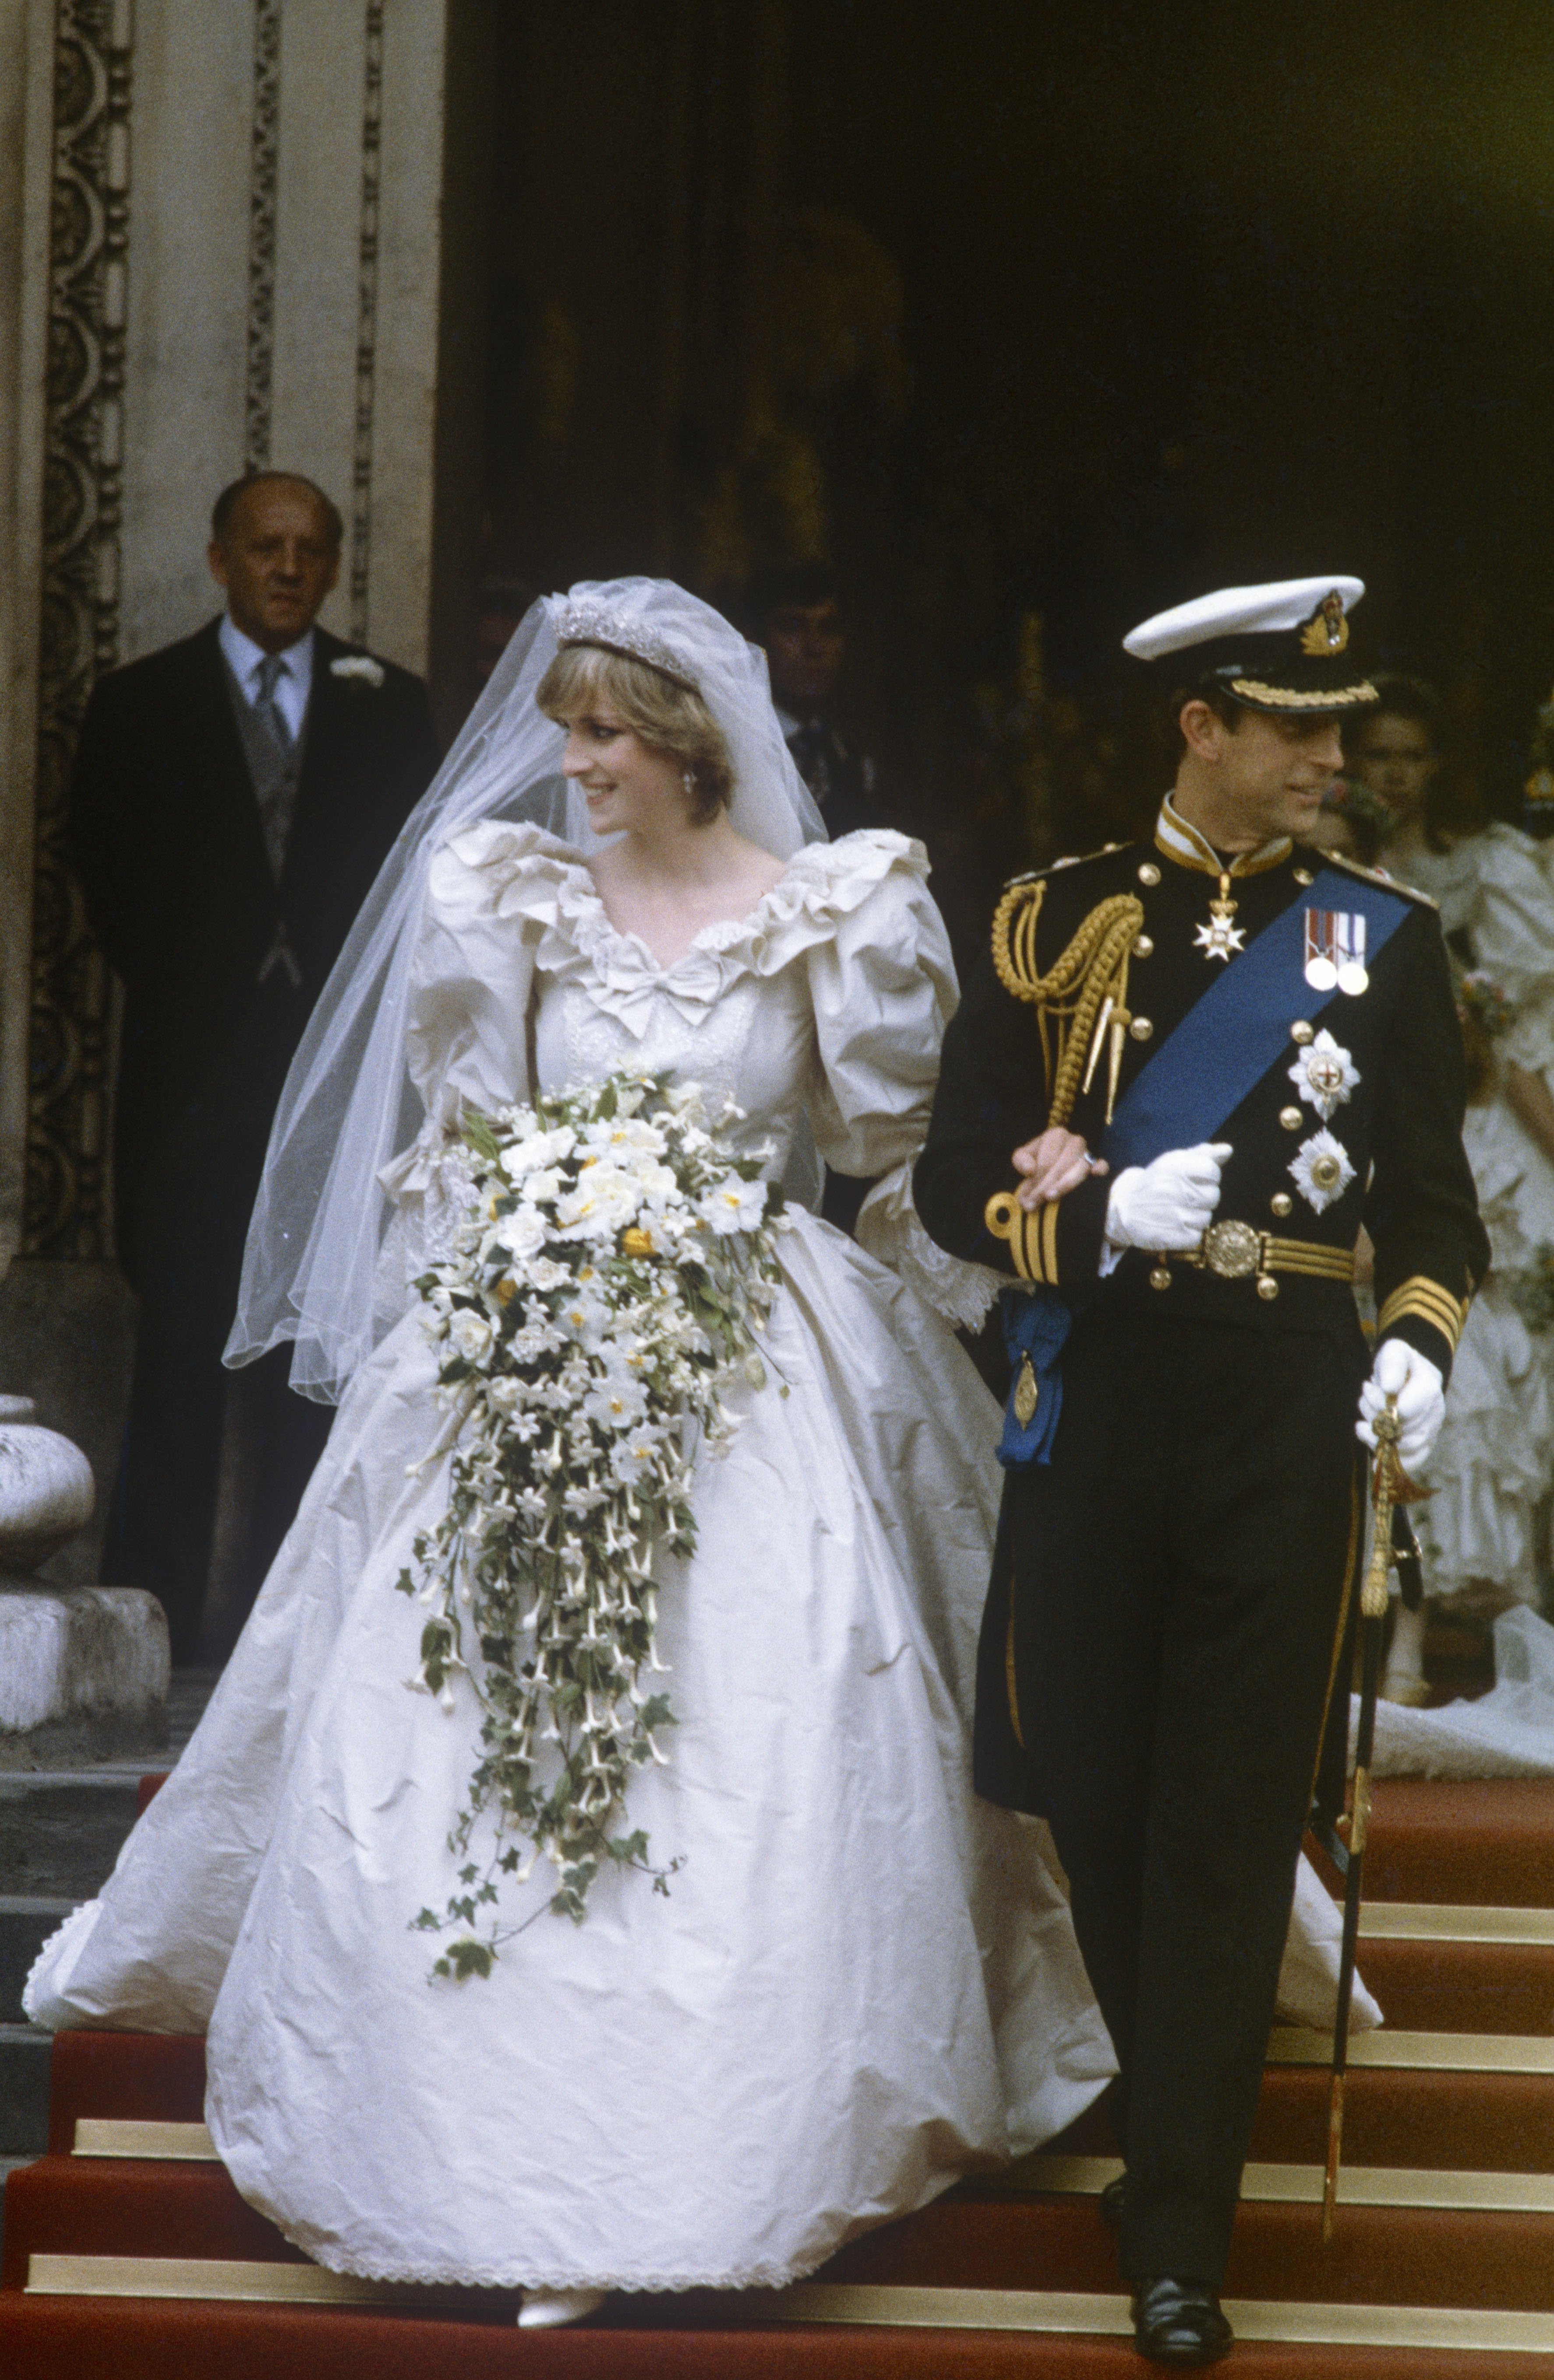 Diana, Princess of Wales and Prince Charles leave St. Paul's Cathedral after their wedding on July 29, 1981, in London. | Source: Getty Images.